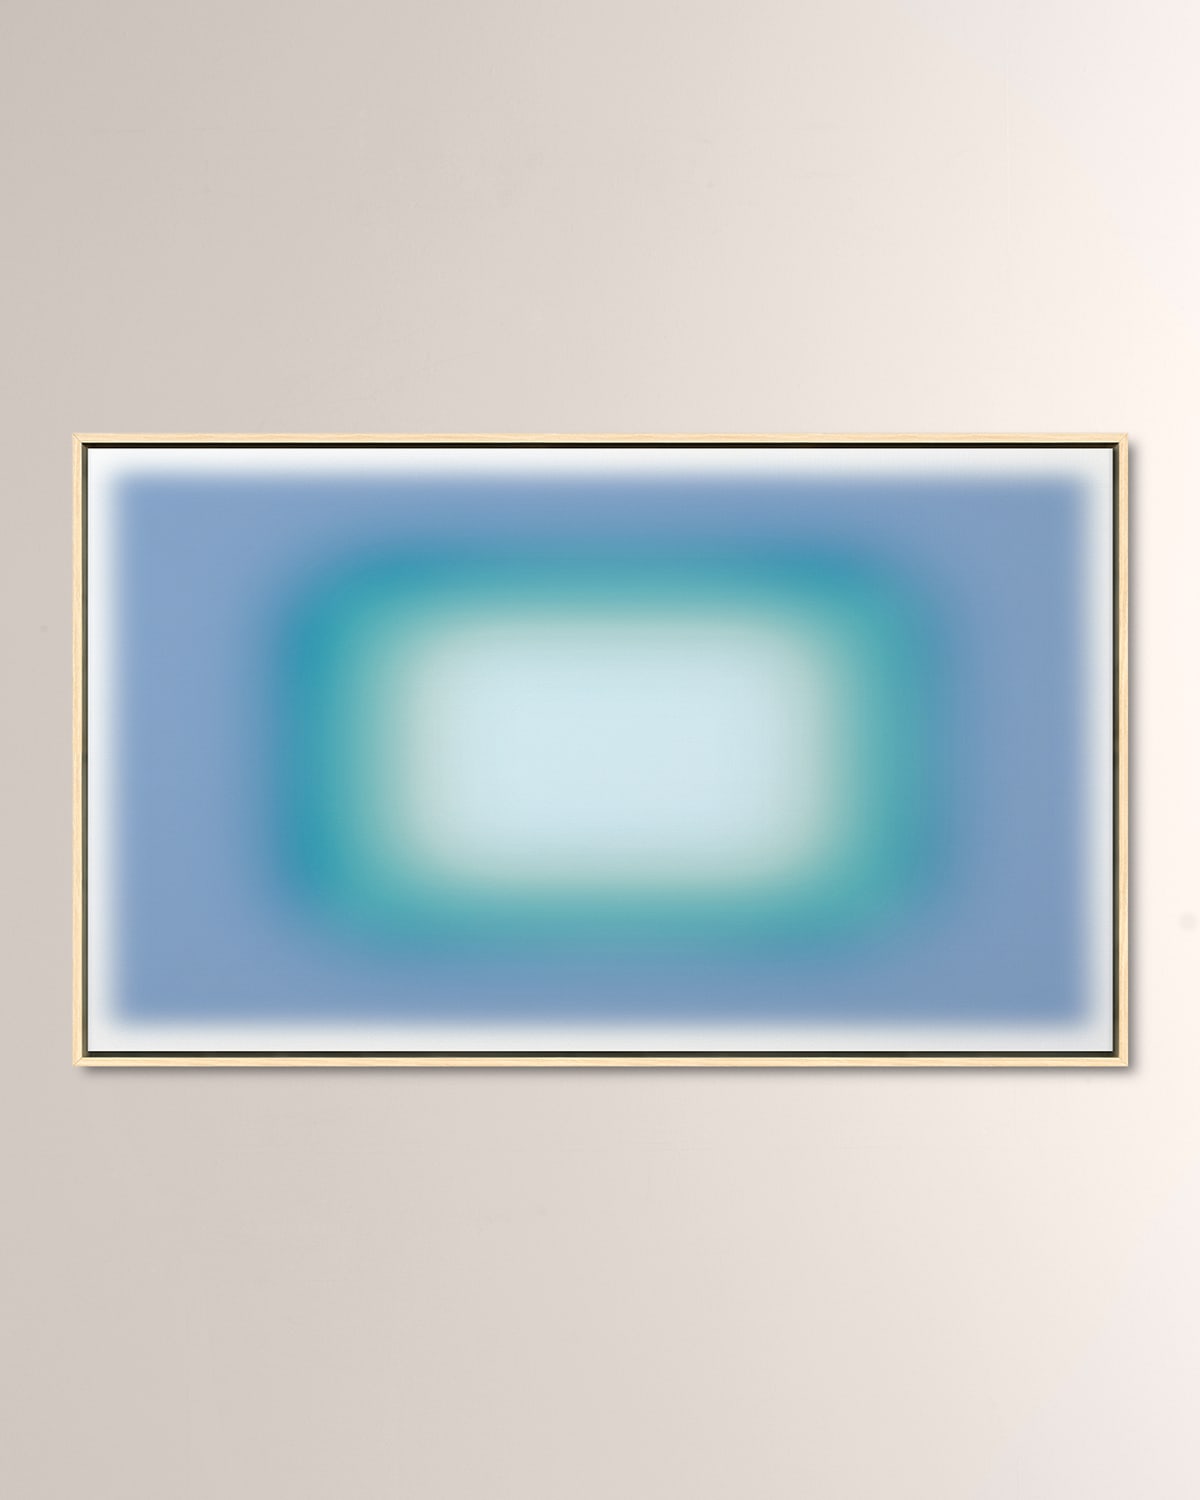 Grand Image Blur Continuum 5 Giclee By Renee Stramel In Blue